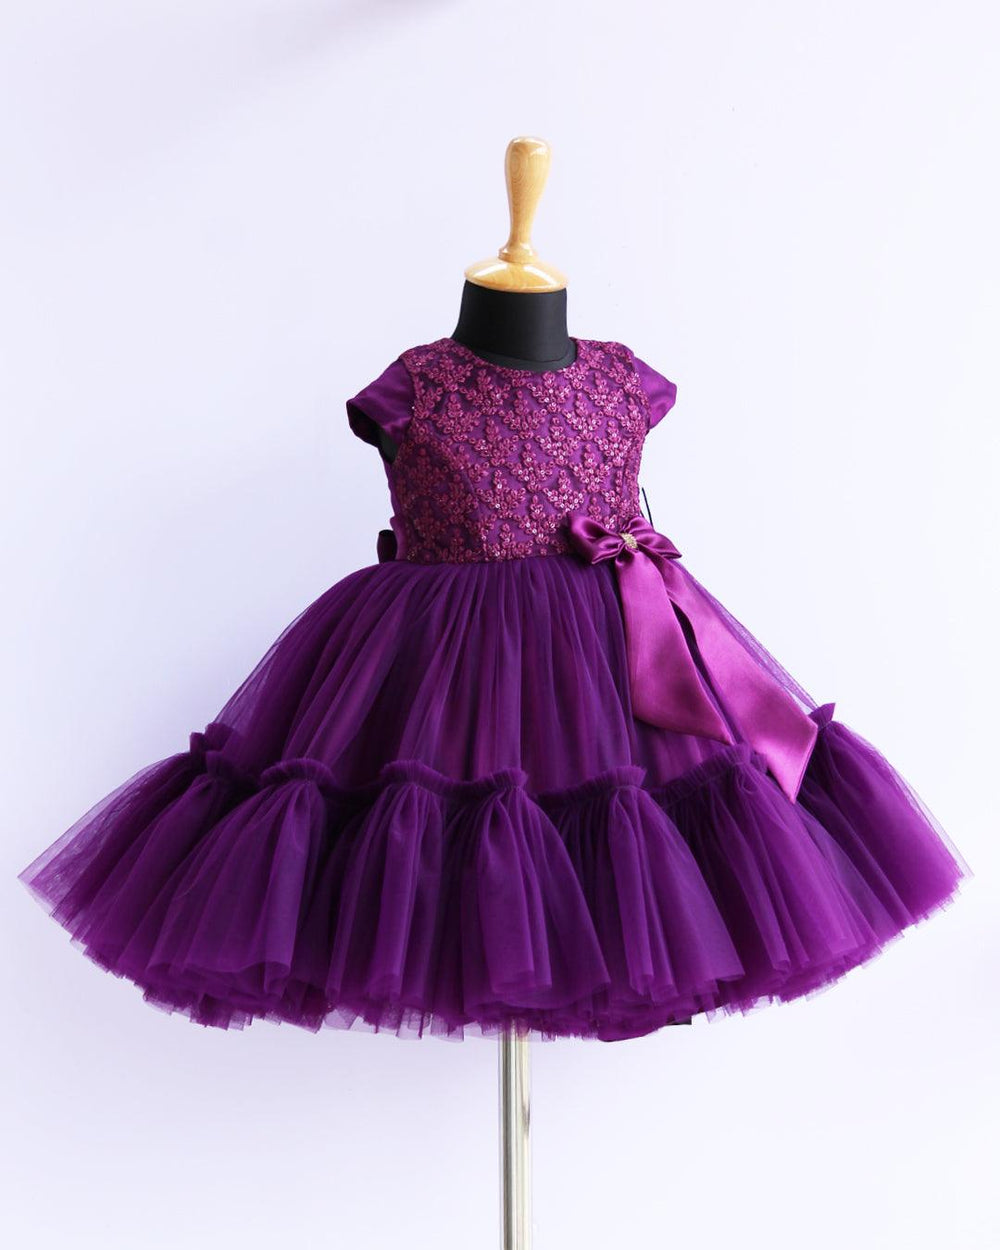 Purple Sequins Thread Embroidery Flared Ruffles Birthday Frock
Material: Purple mono nylon soft net fabric is used for the bottom of the skirt. End of the frock is designed in a pleated ruffles pattern. Yoke portion is designed